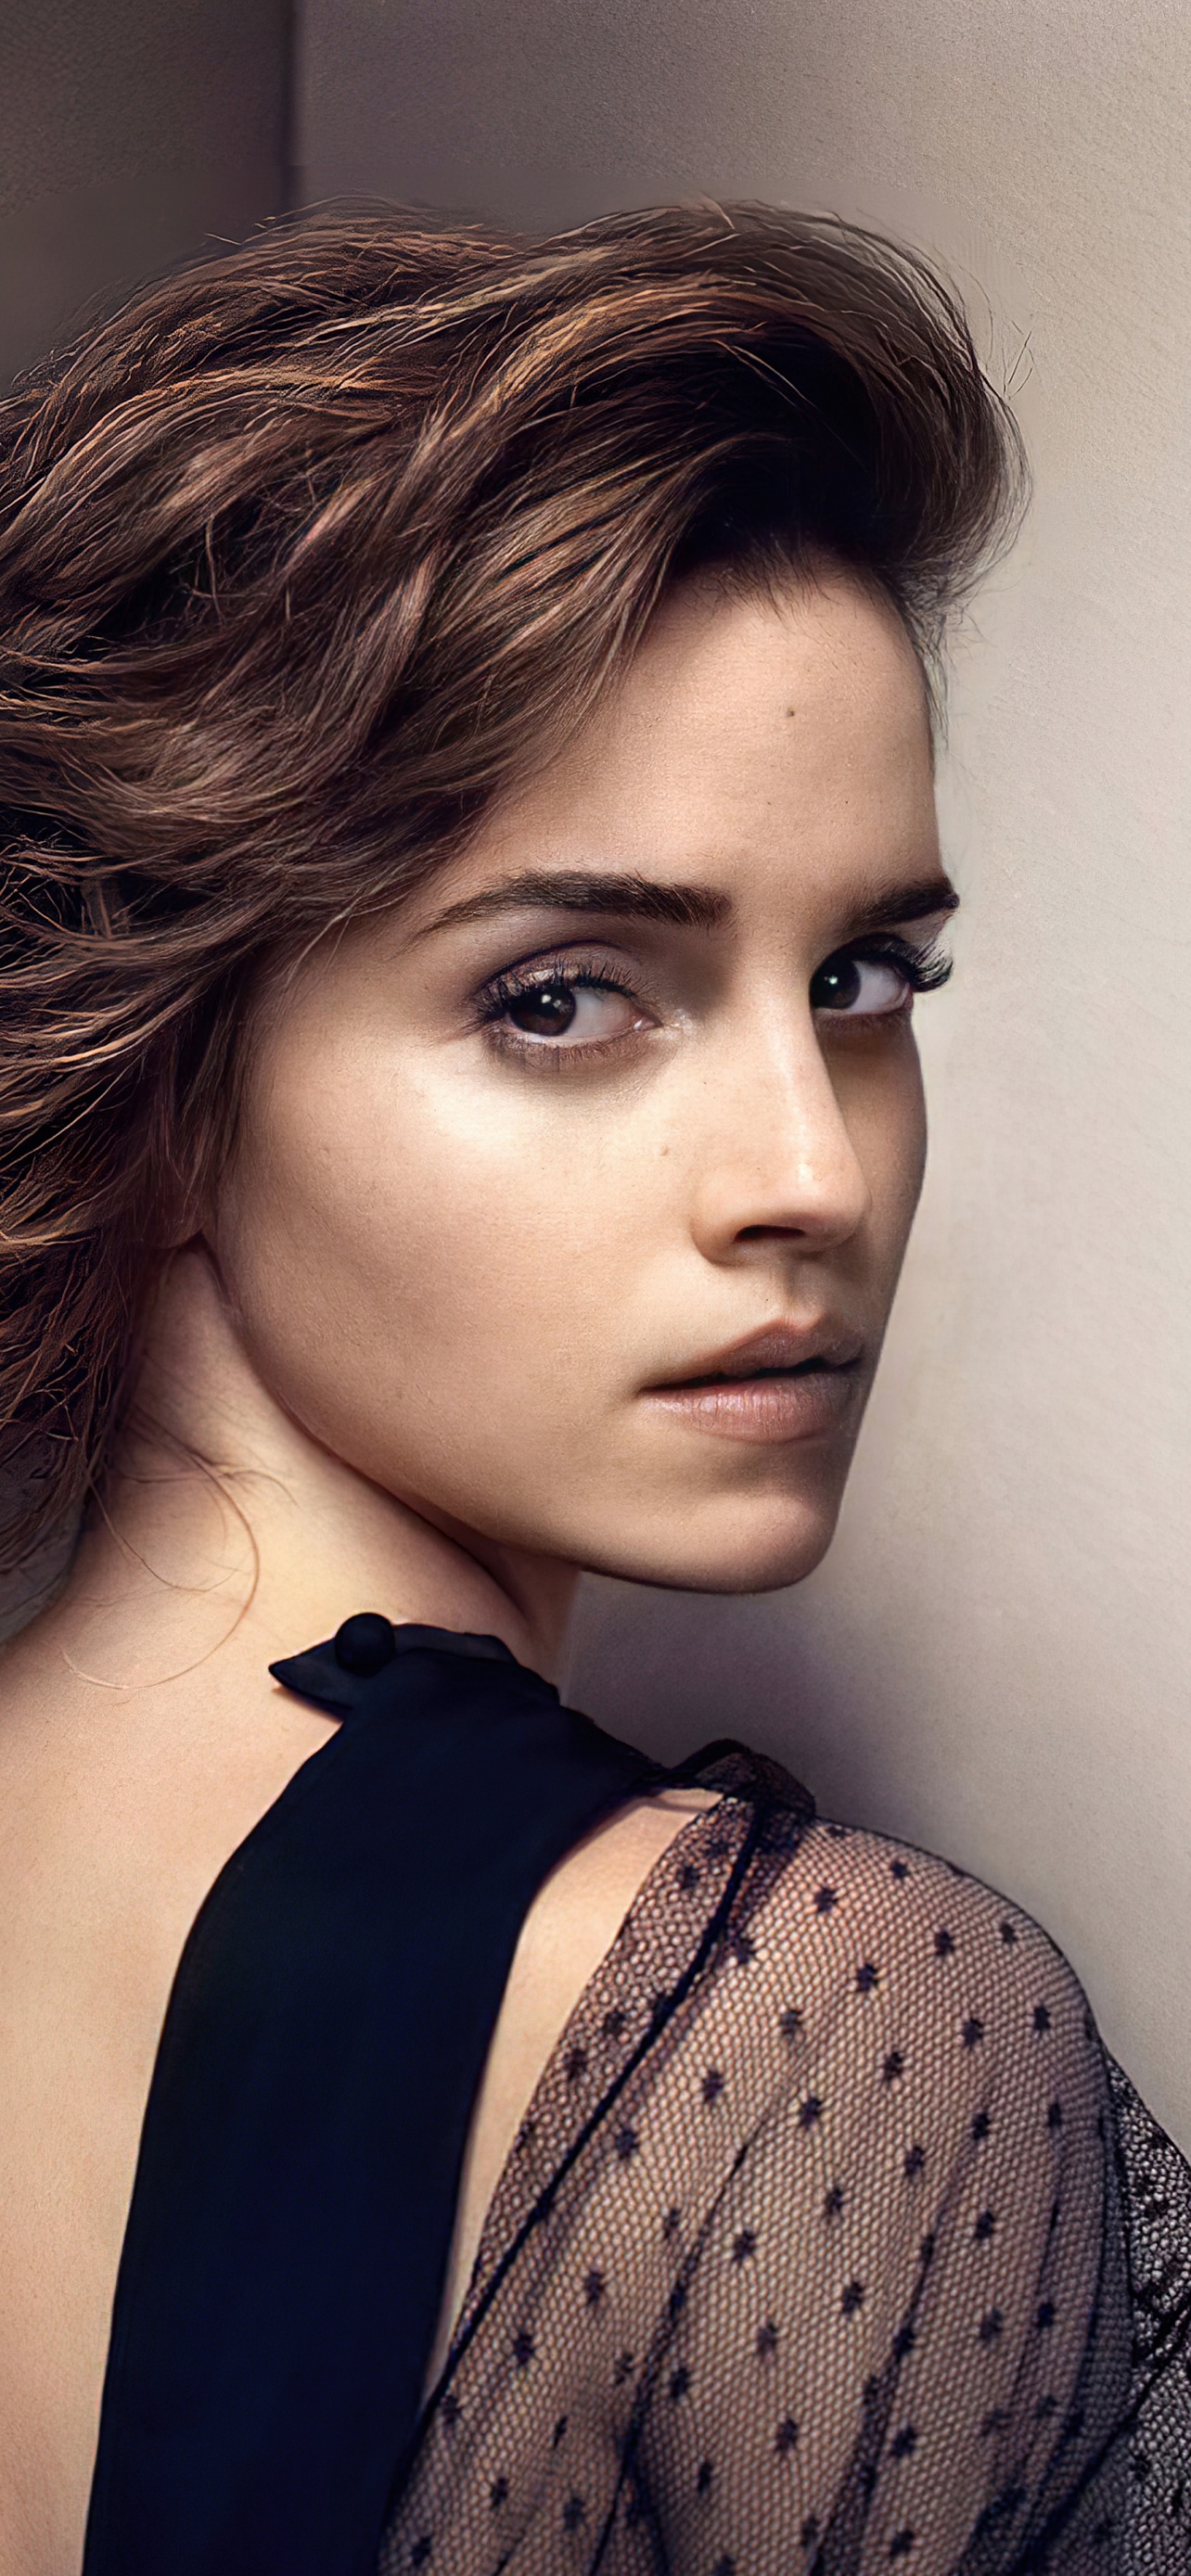 2932x2932 Emma Watson Ipad Pro Retina Display HD 4k Wallpapers Images  Backgrounds Photos and Pictures